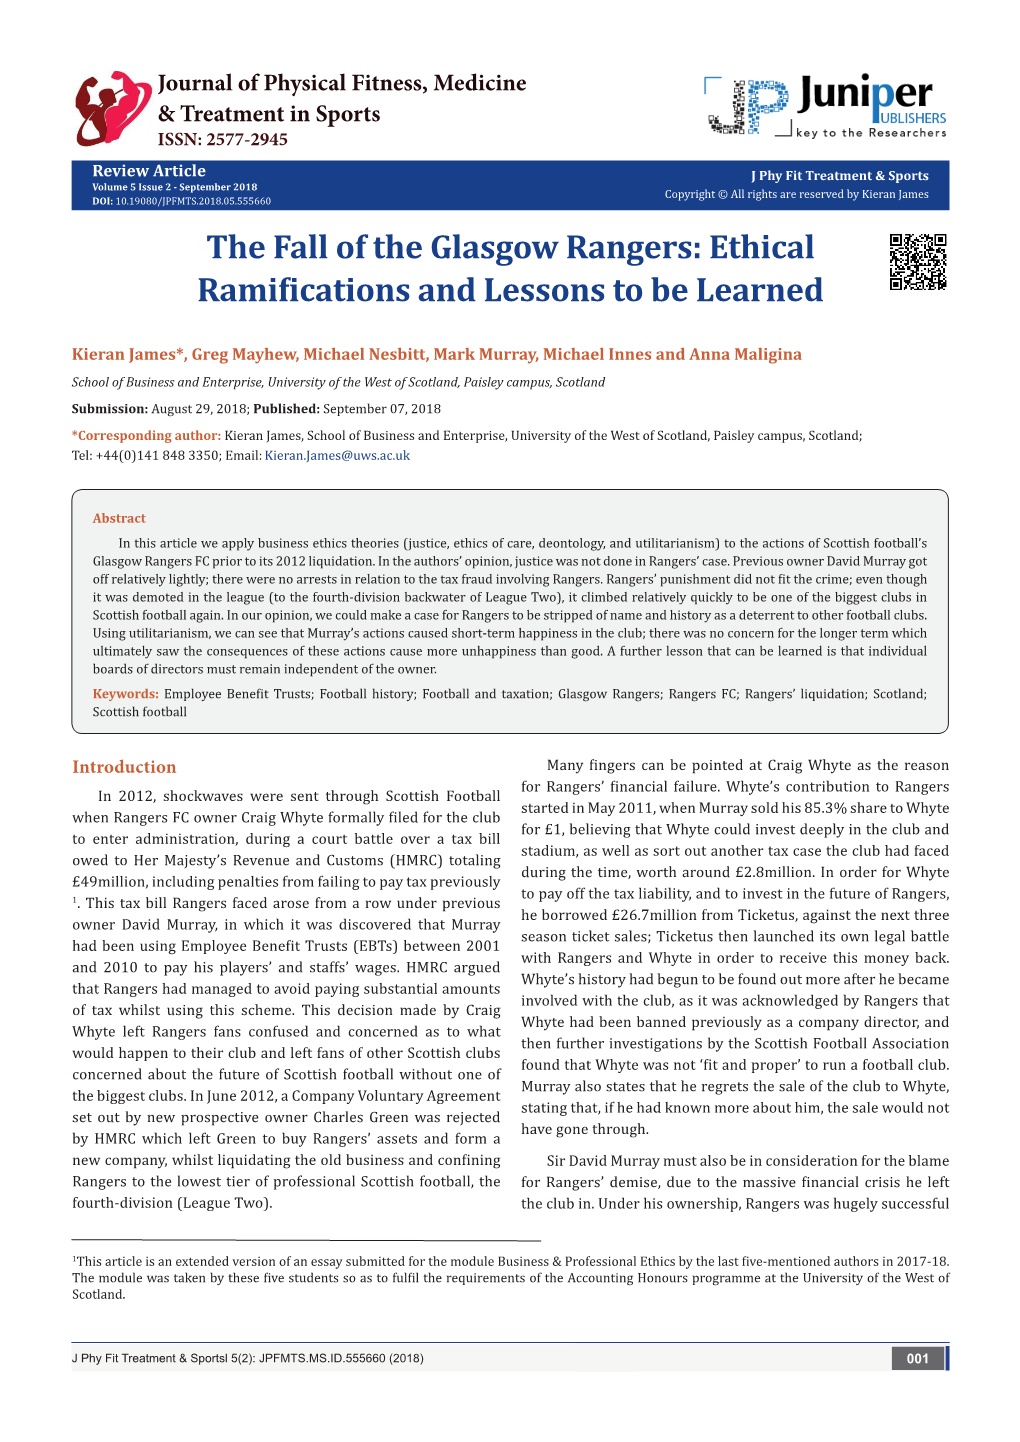 The Fall of the Glasgow Rangers: Ethical Ramifications and Lessons to Be Learned